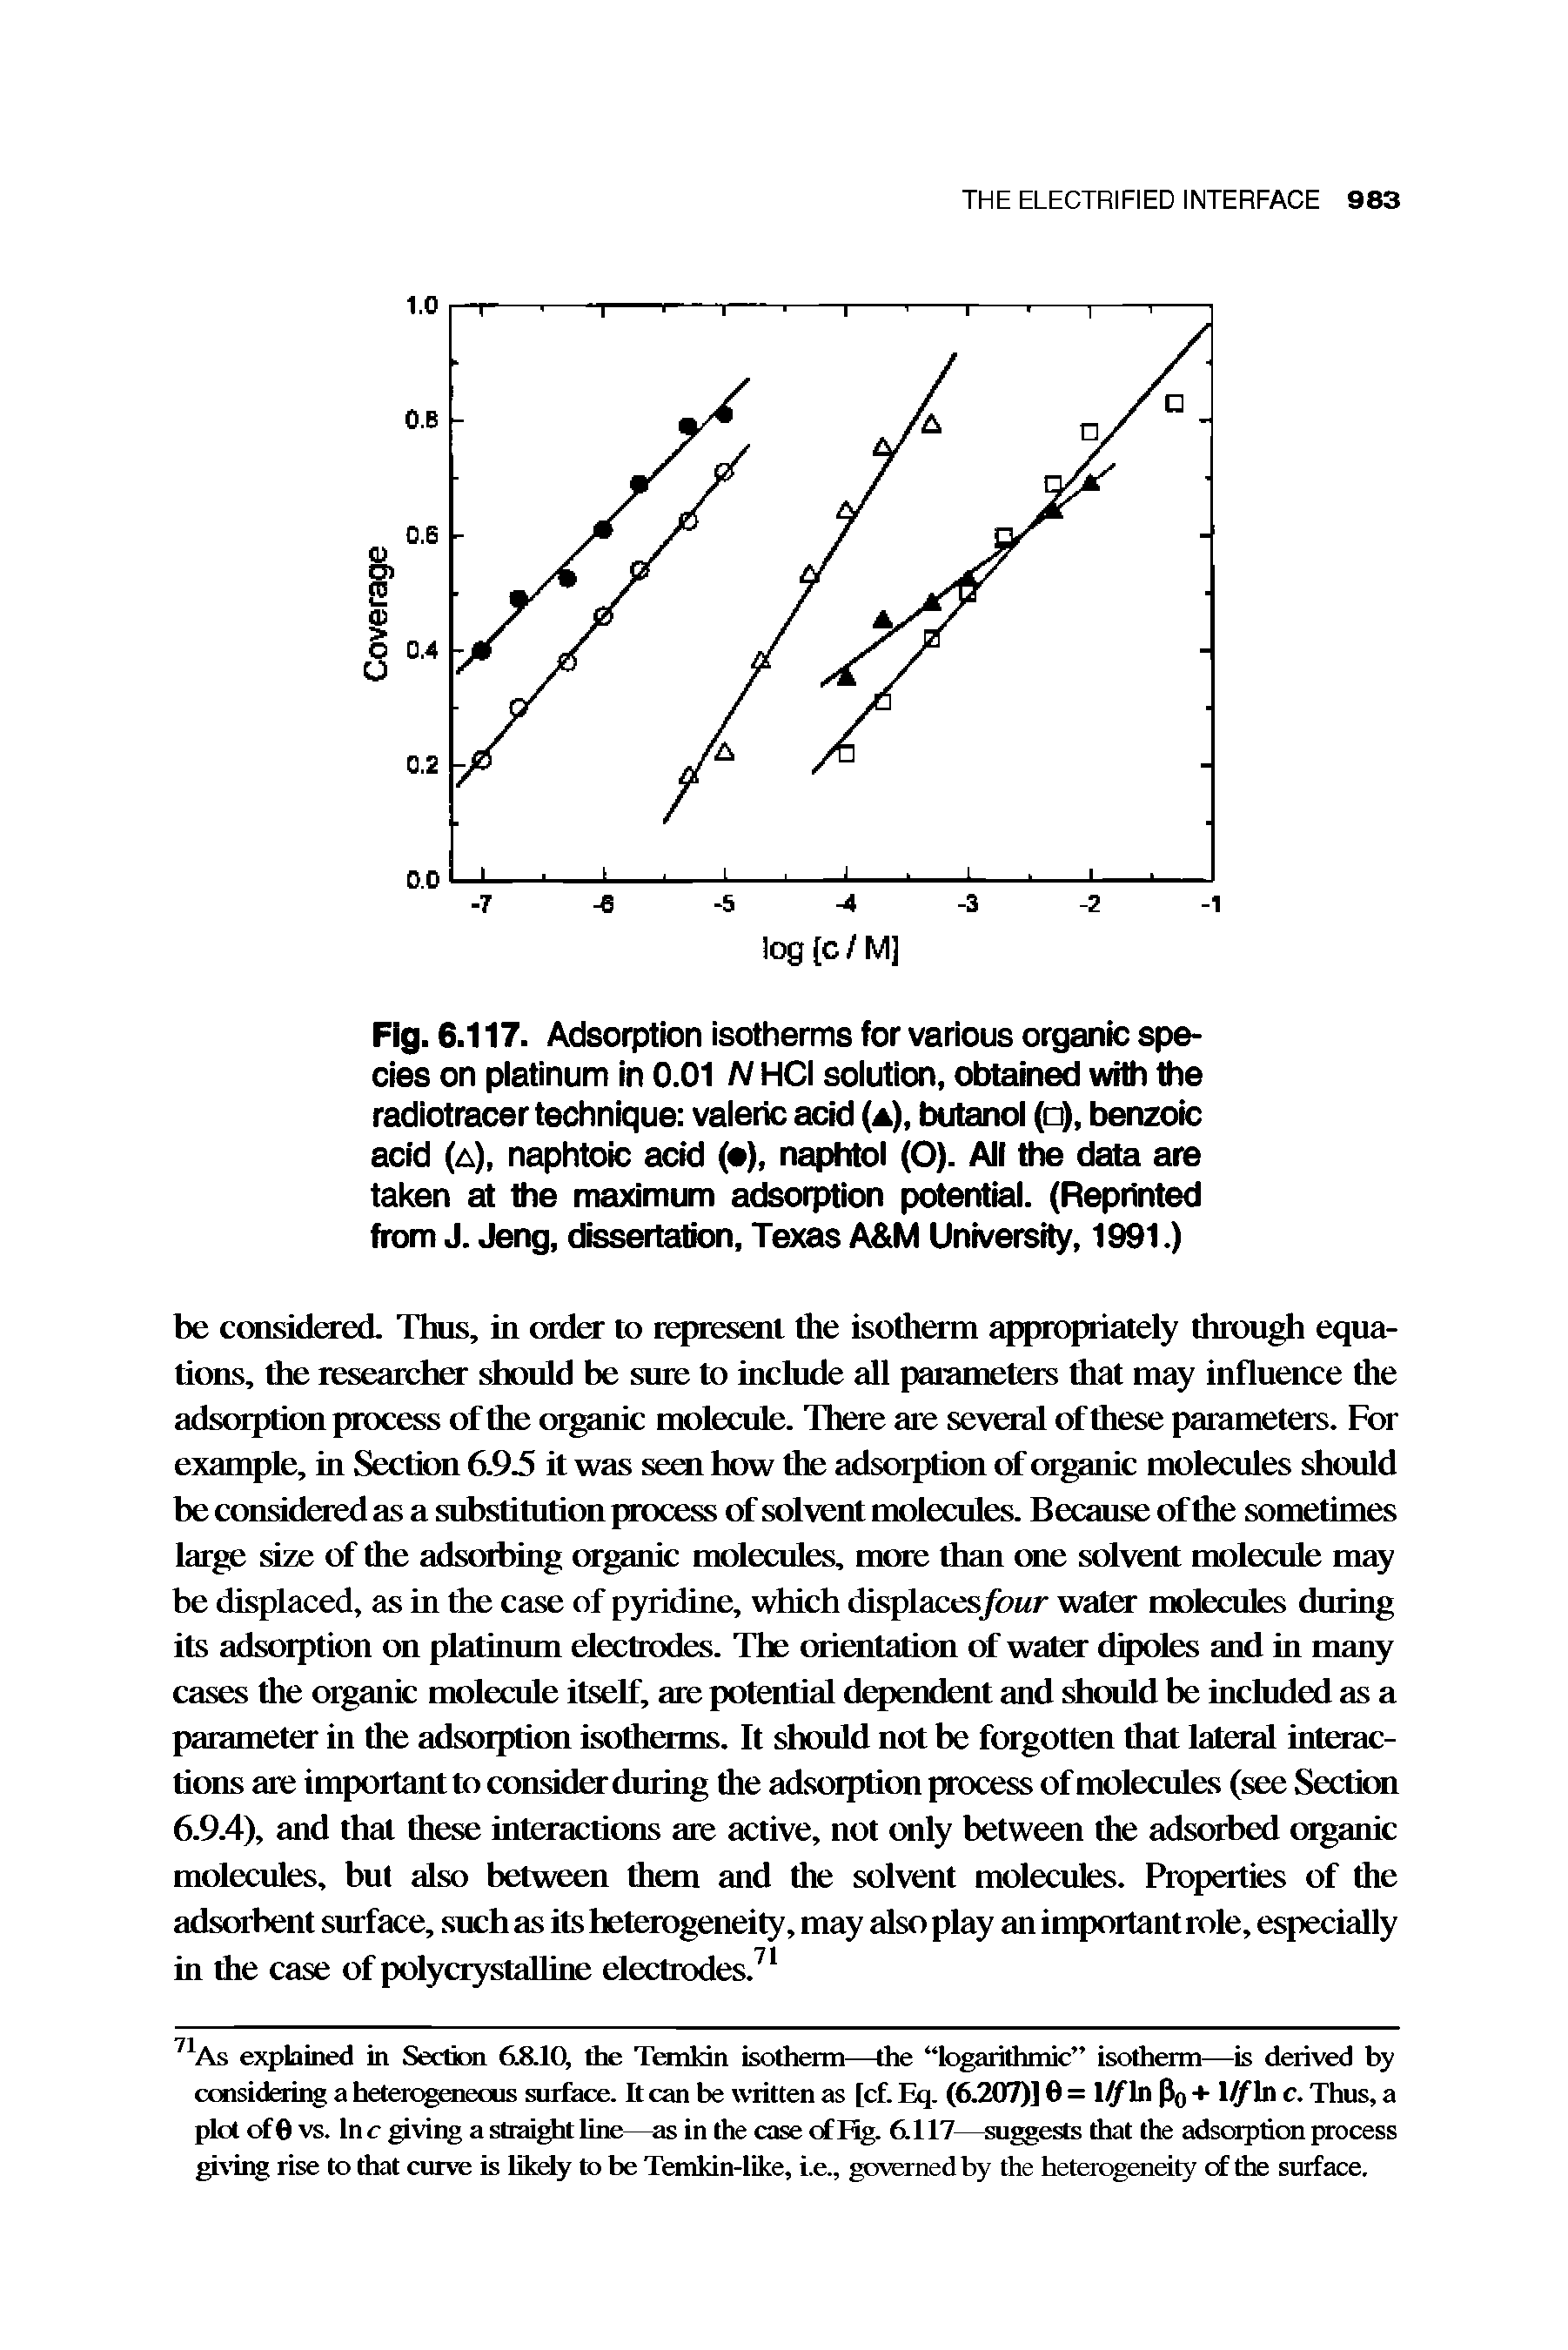 Fig. 6.117. Adsorption isotherms for various organic species on platinum in 0.01 N HCI solution, obtained with the radiotracer technique valeric acid (a), butanol ( ), benzoic acid (a), naphtoic acid ( ), naphtol (O). All the data are taken at the maximum adsorption potential. (Reprinted from J. Jeng, dissertation, Texas A M University, 1991.)...